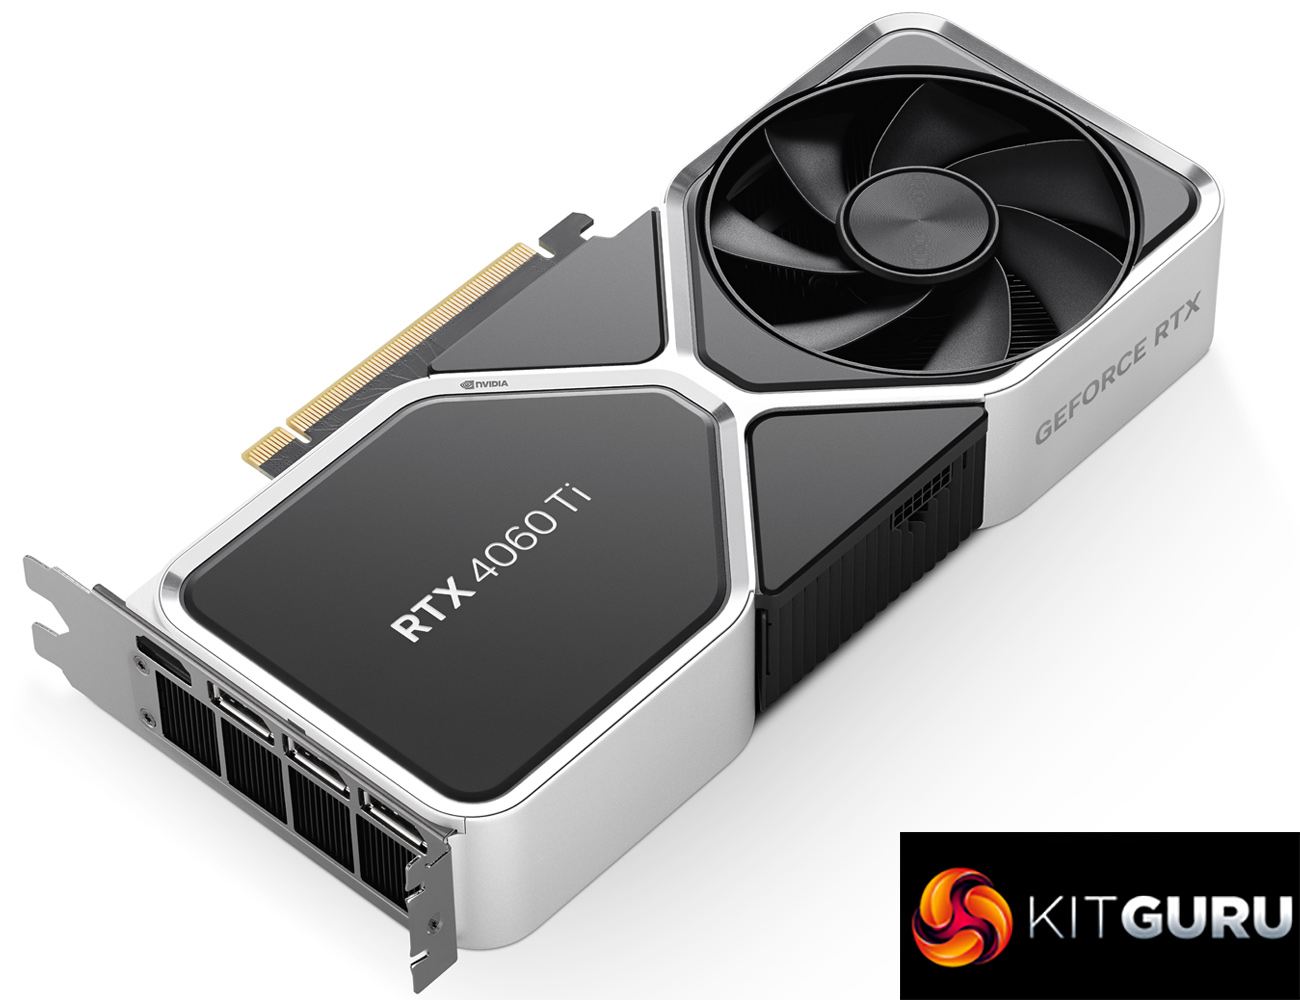 AMD Radeon RX 7600 & NVIDIA GeForce RTX 4060 Ti 8 GB Graphics Cards 3DMark  Benchmarks Leak Out